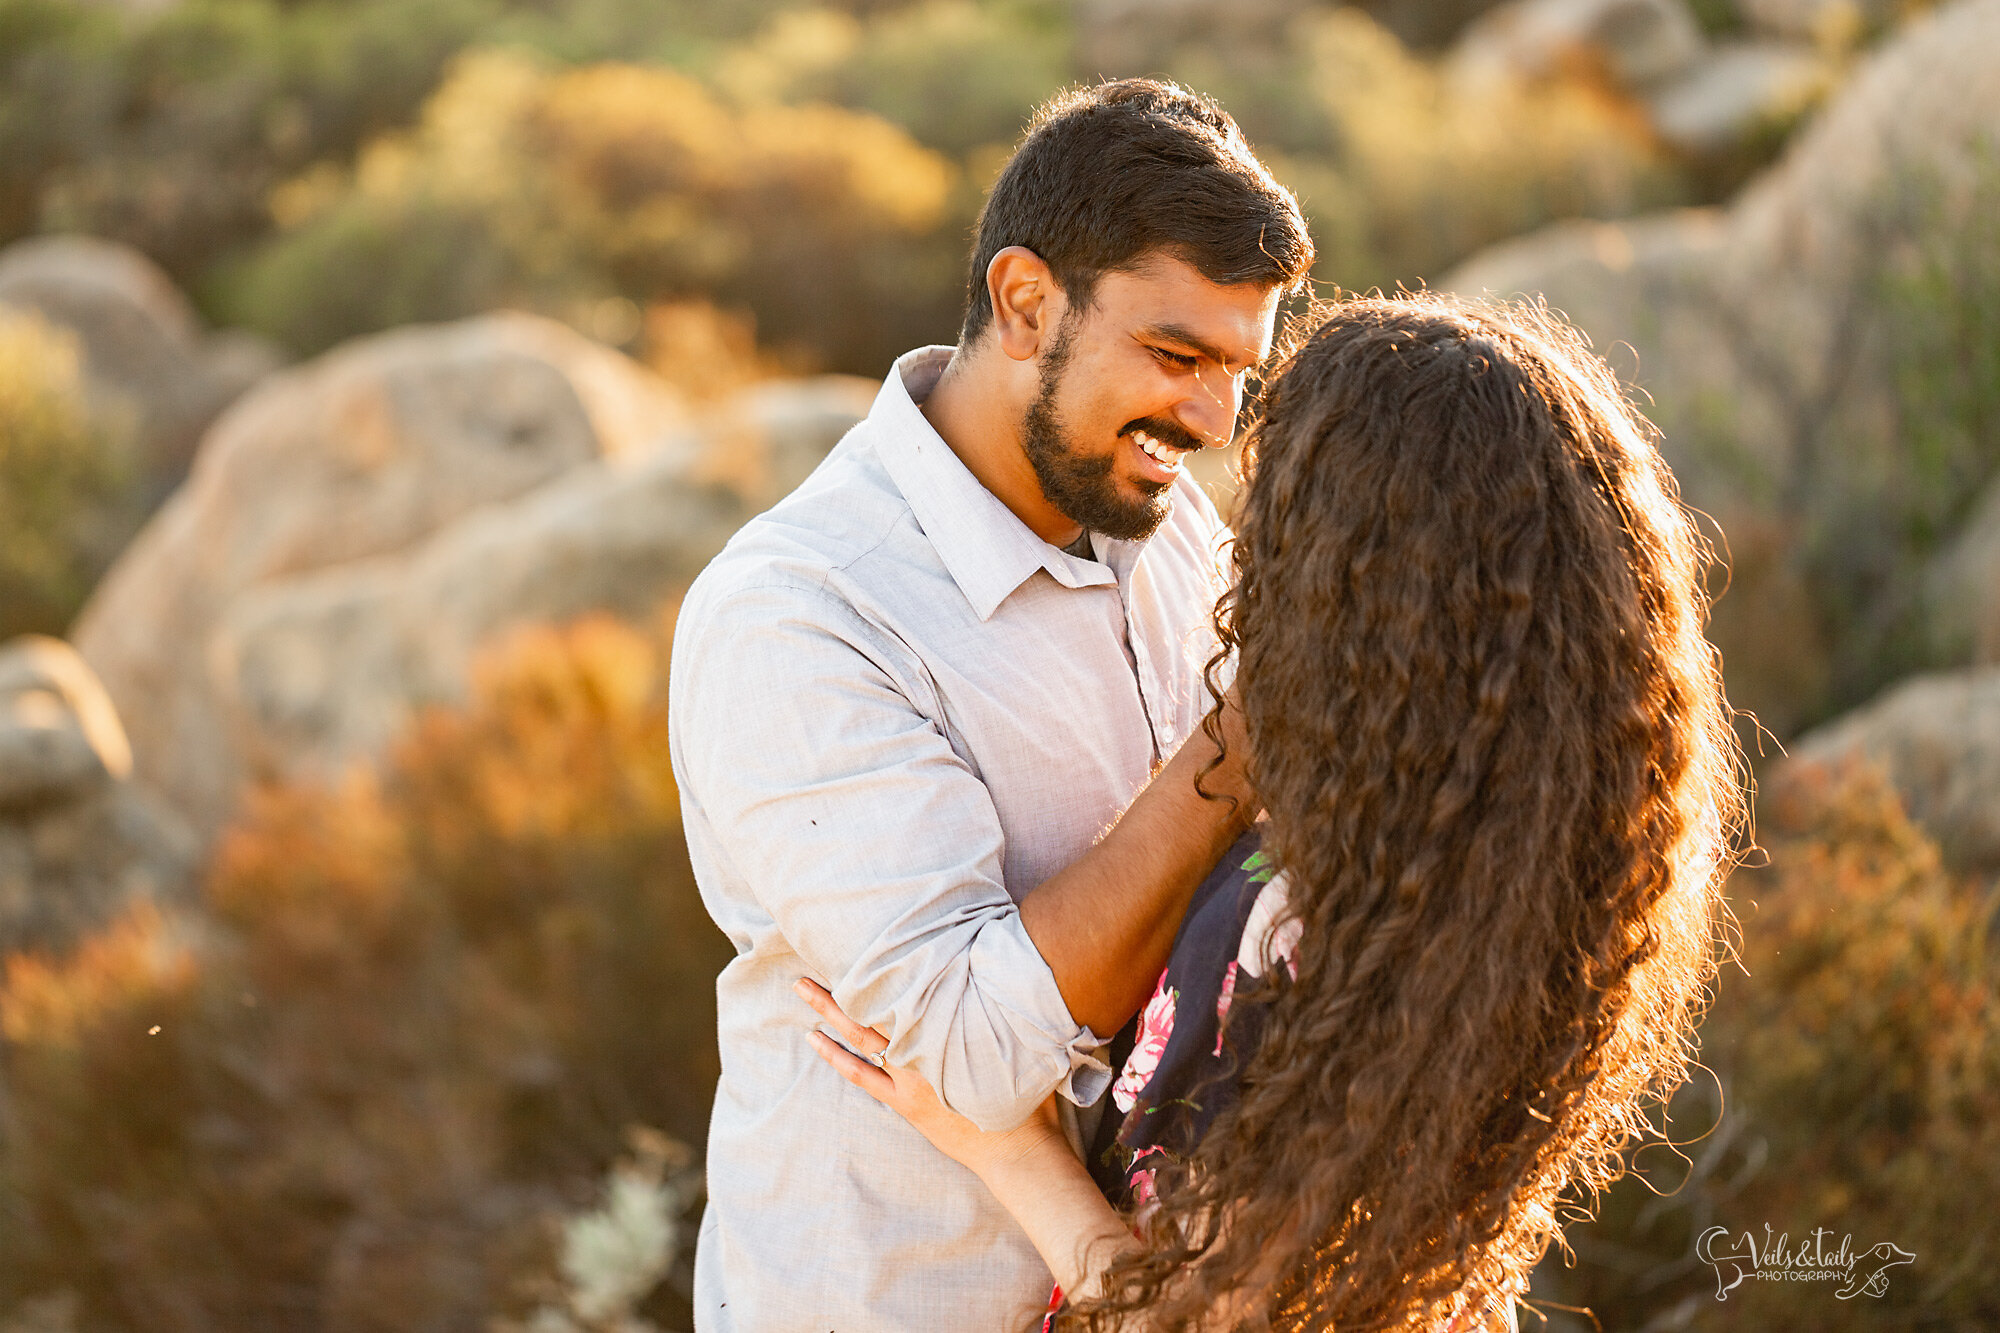 sunset engagement session at Lizard's Mouth in Santa Barbara